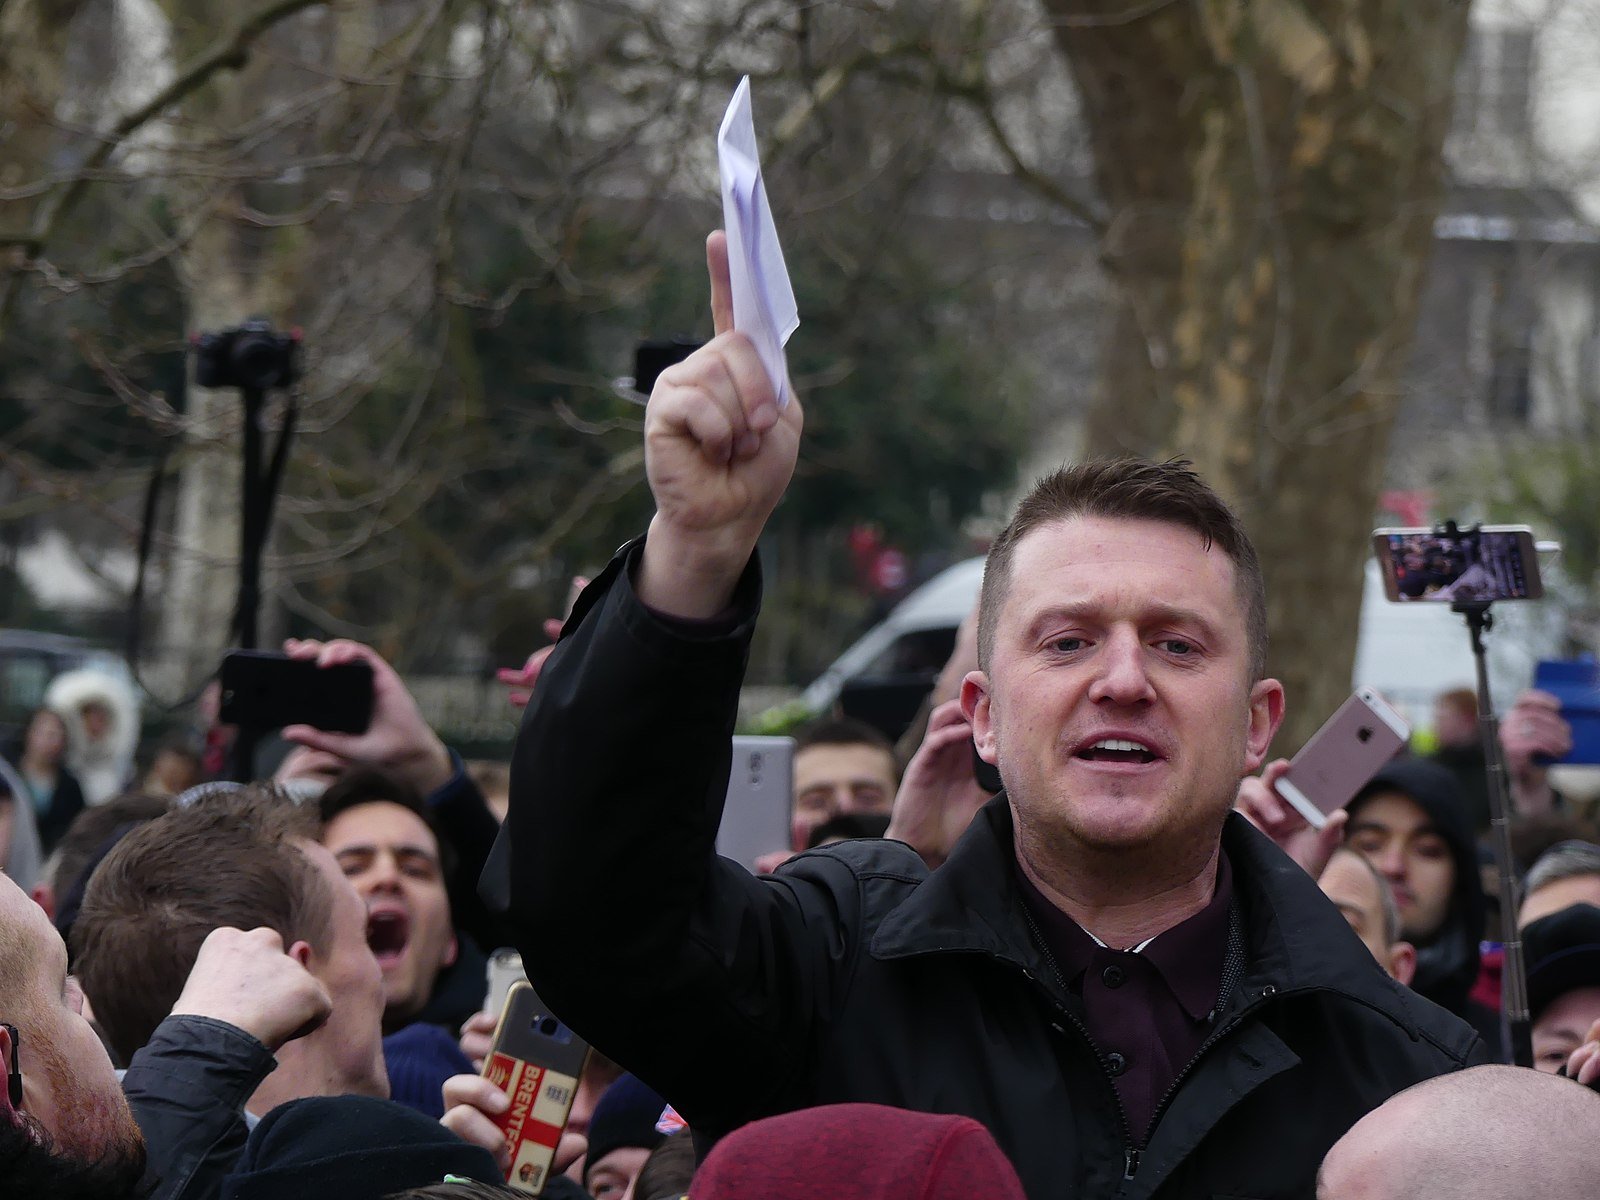 Lights, camera, actionable libel: A look into far-right activist Tommy Robinson’s new film